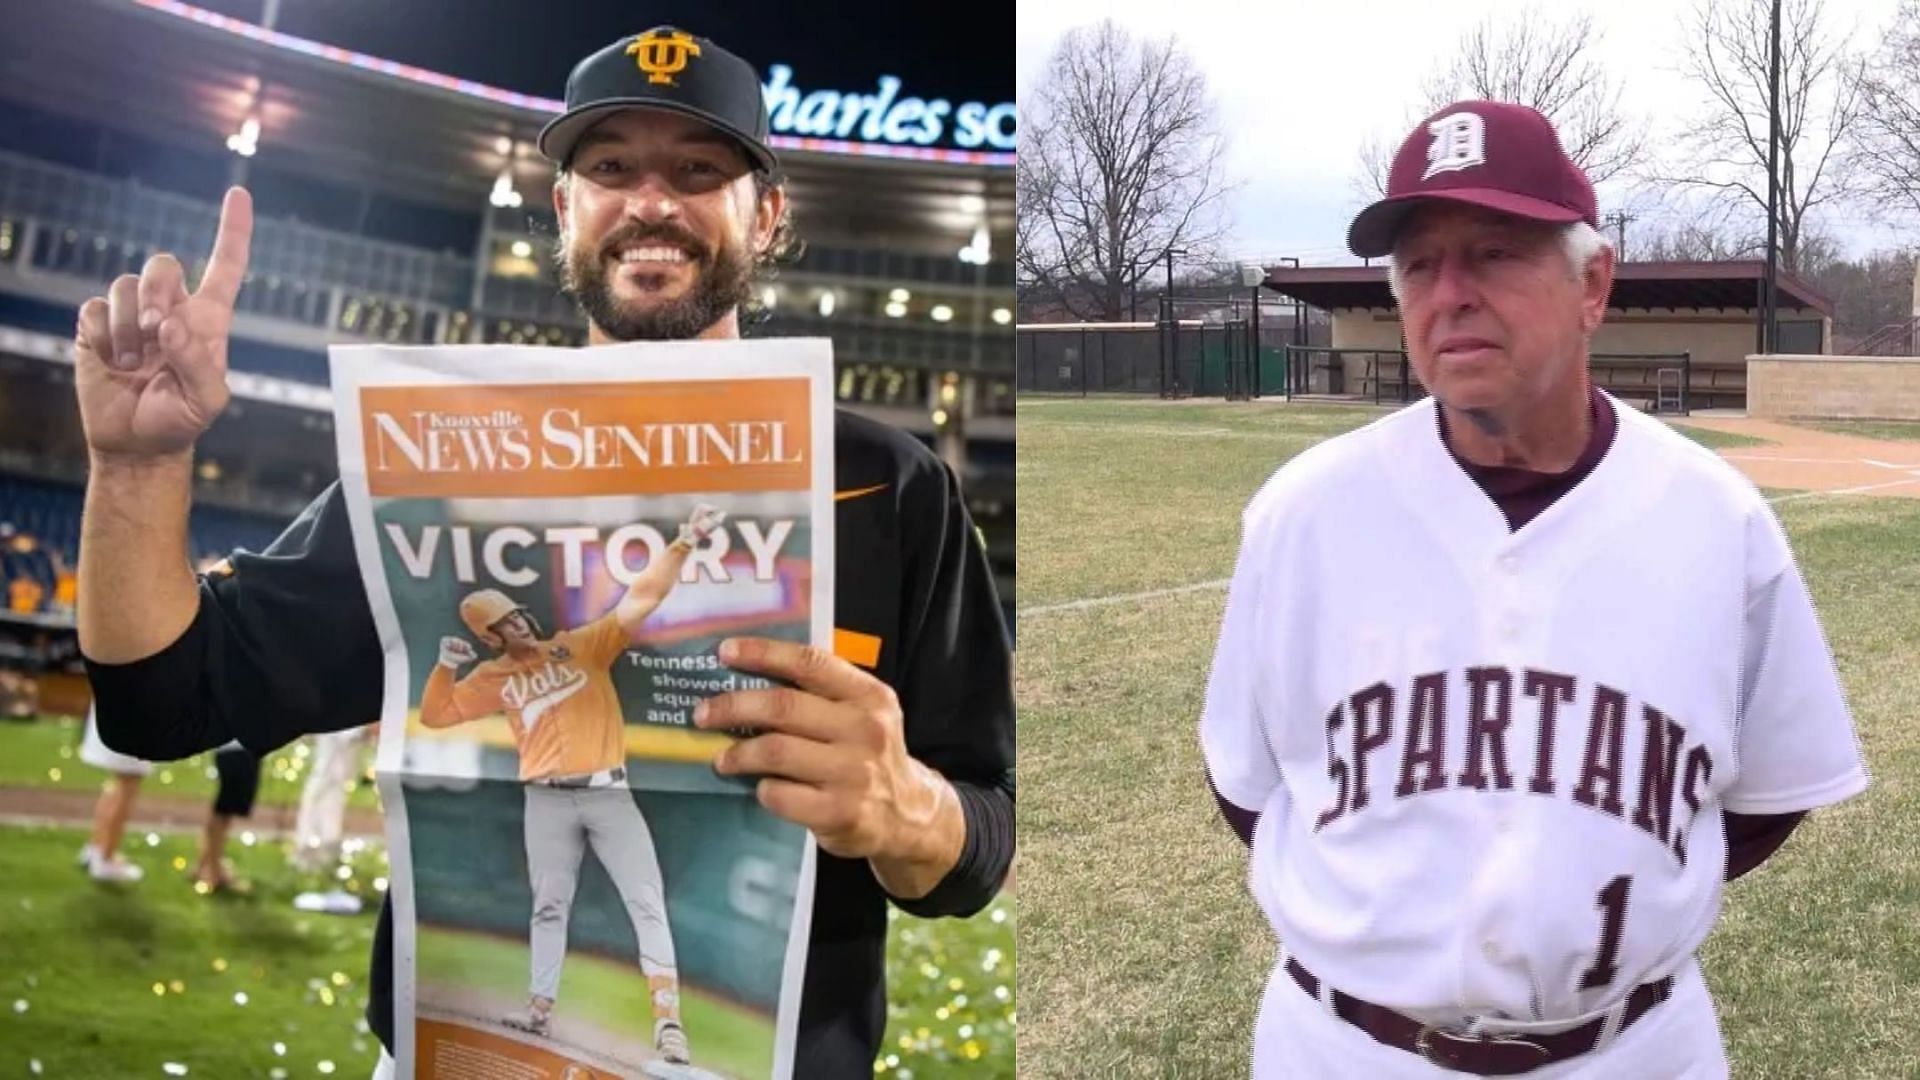 From left to right: Tennessee Volunteers coach Tony Vitello and his father Greg (Image Sources: Tony Vitello - IMAGN; Greg Vitello - https://mosportshalloffame.com/inductees/greg-vitello/#pid=2)